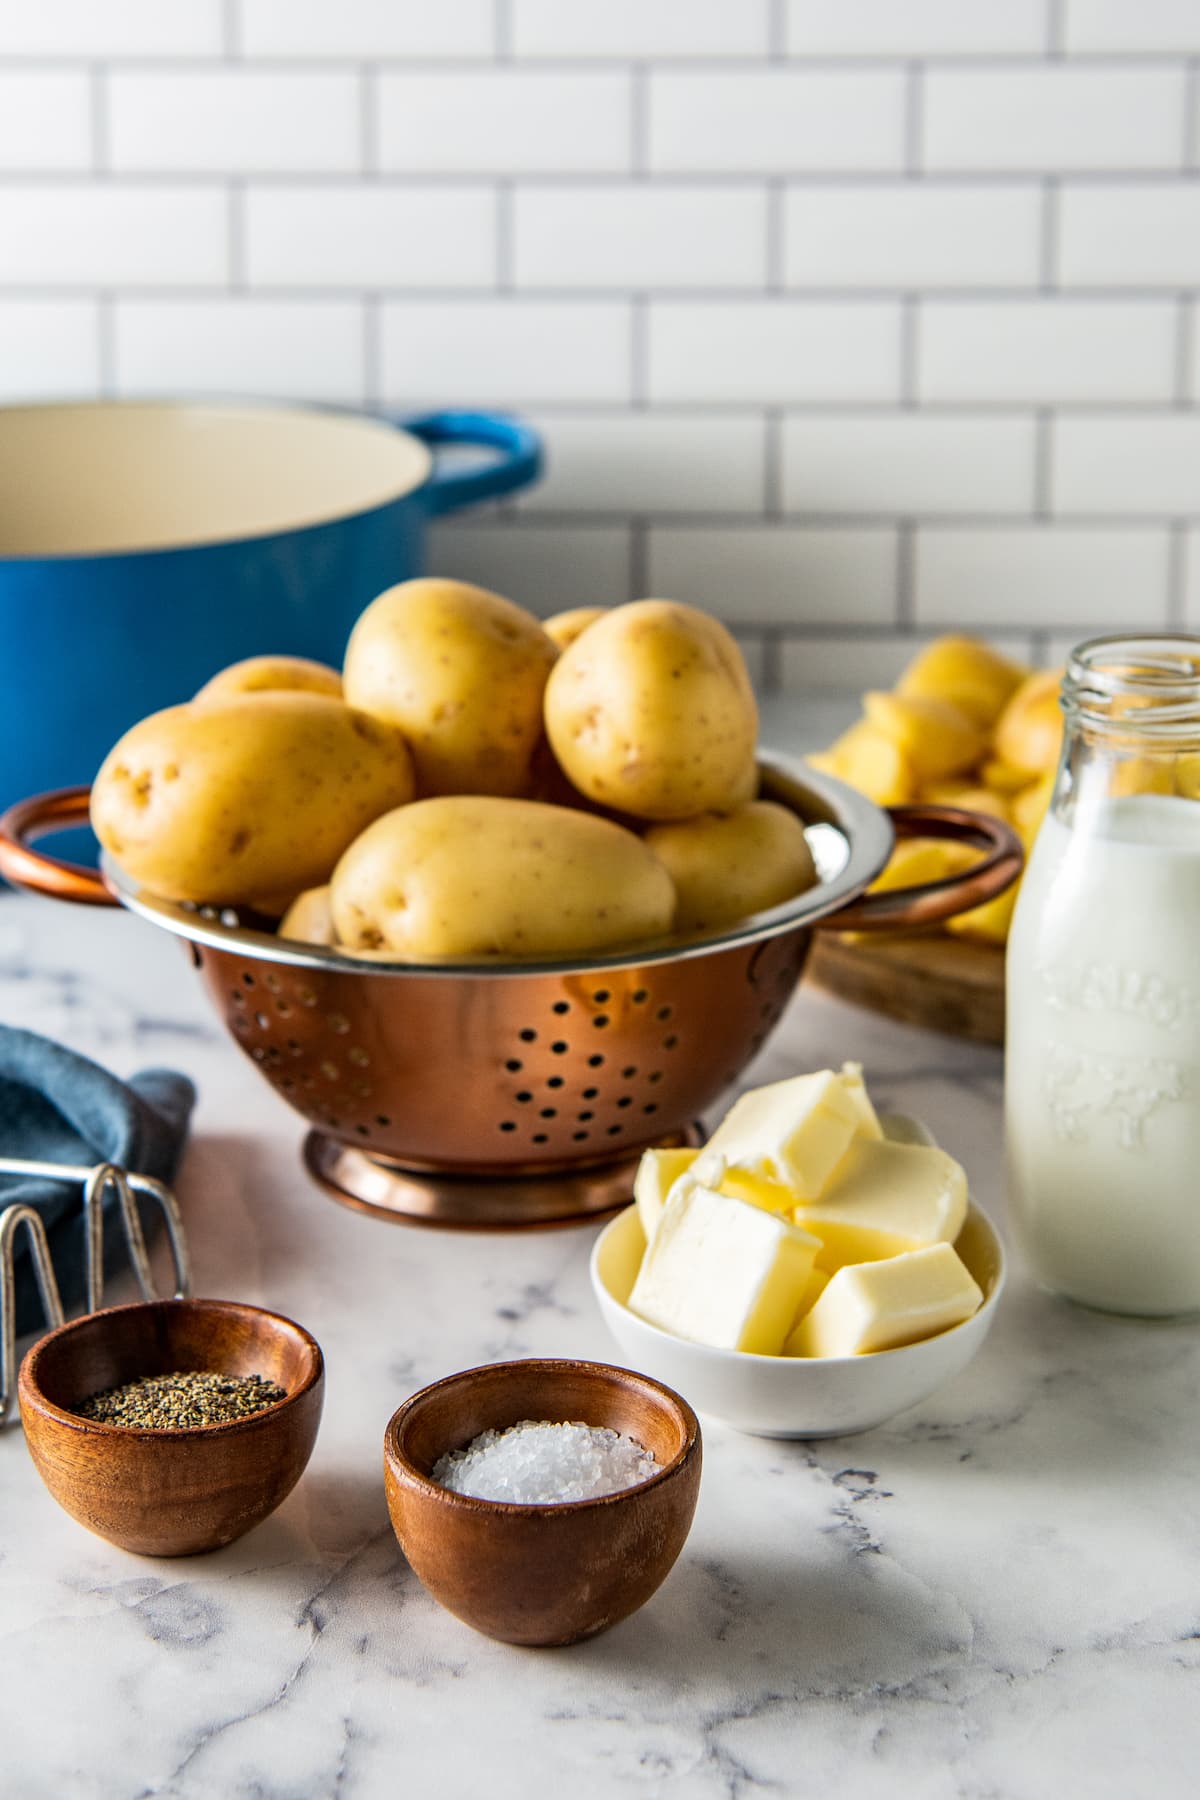 a colander with whole potatoes on the counter with a container of cream, bowl of butter, salt and pepper